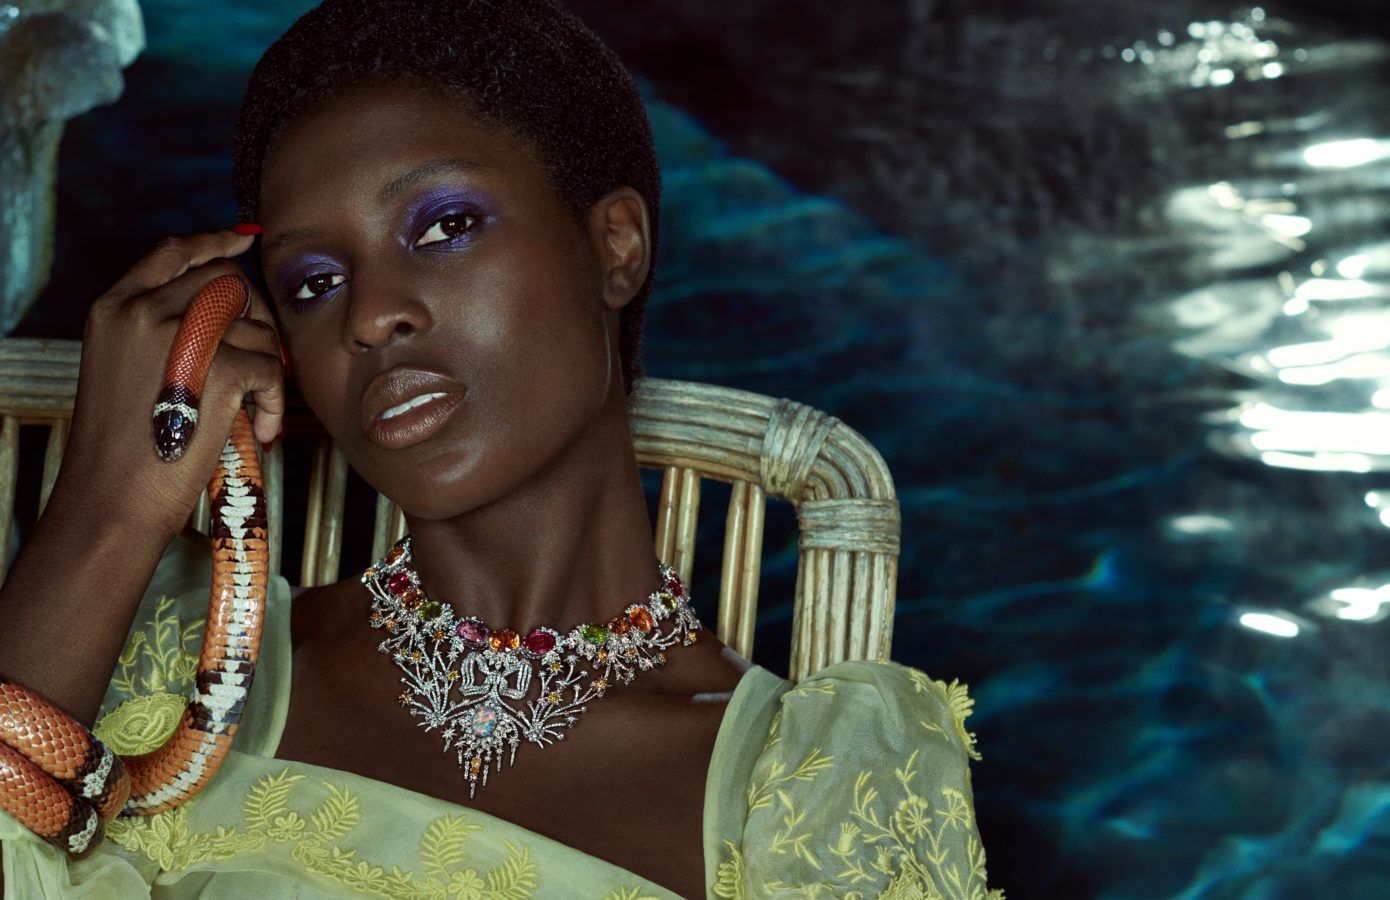 Gucci second collection of High Jewellery is inspired by ethereal skies